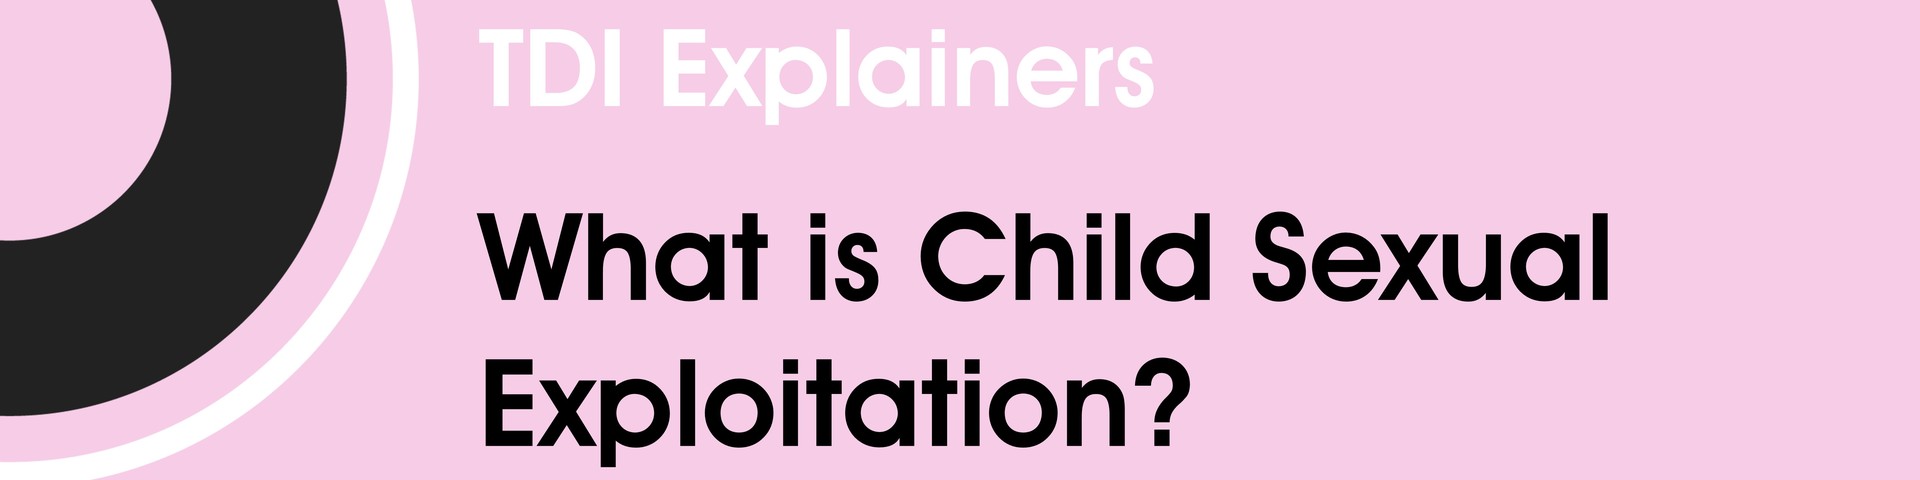 What is Child Sexual Exploitation?